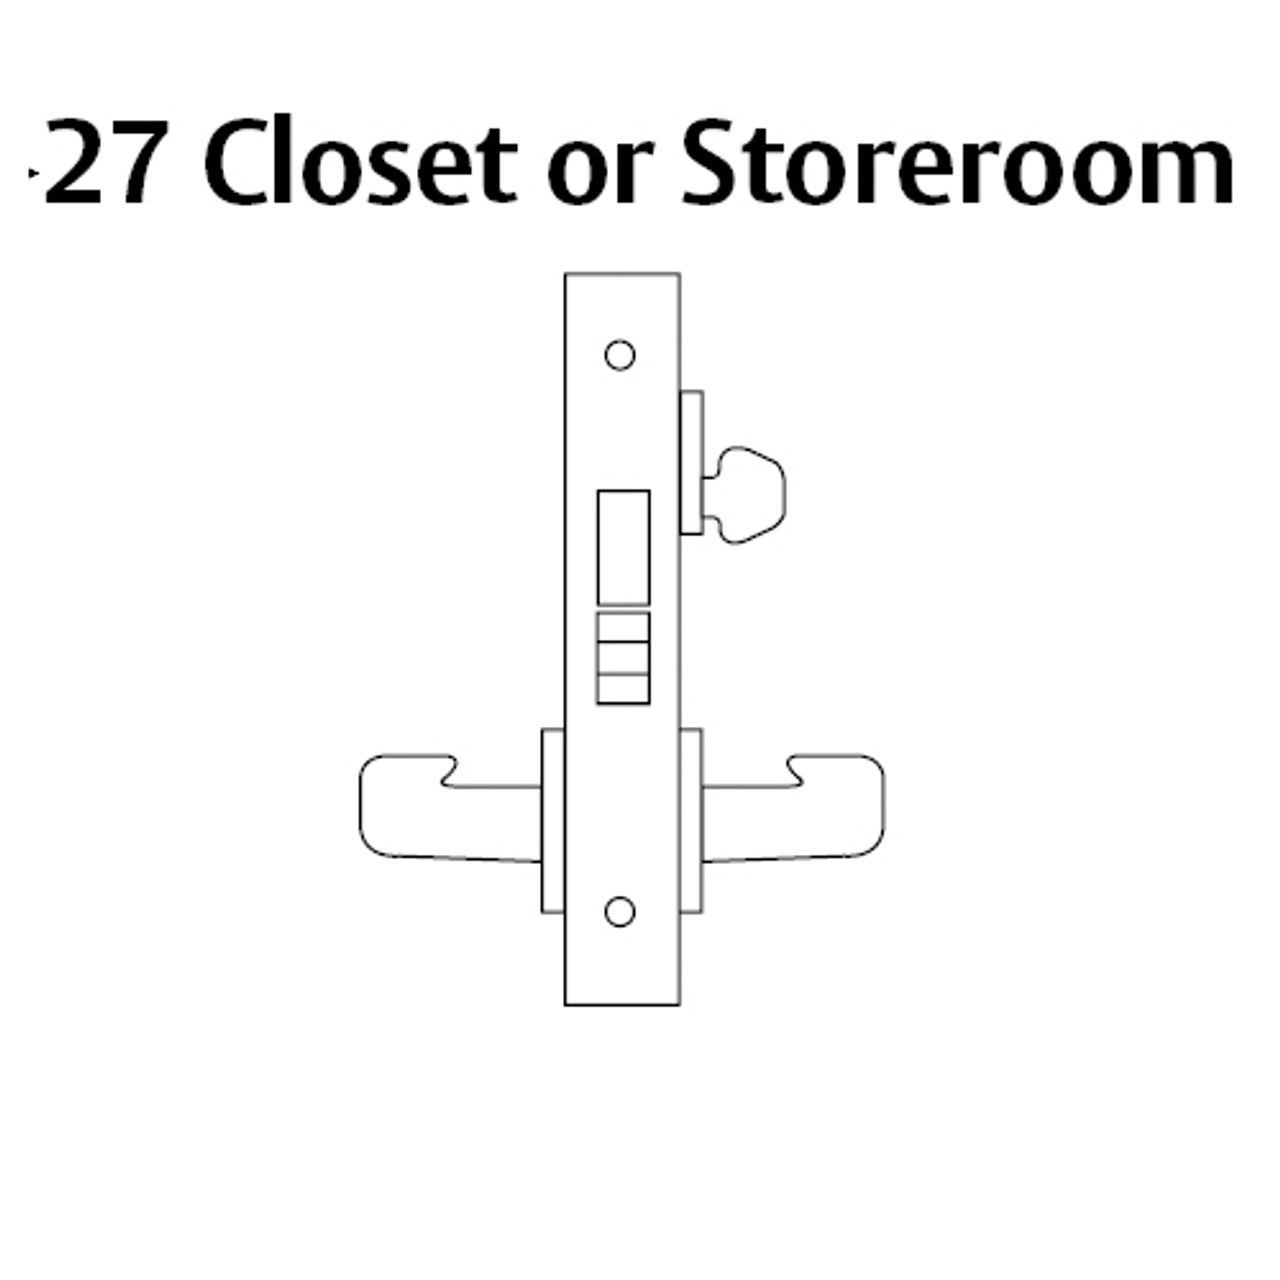 8227-LNW-10 Sargent 8200 Series Closet or Storeroom Mortise Lock with LNW Lever Trim and Deadbolt in Dull Bronze